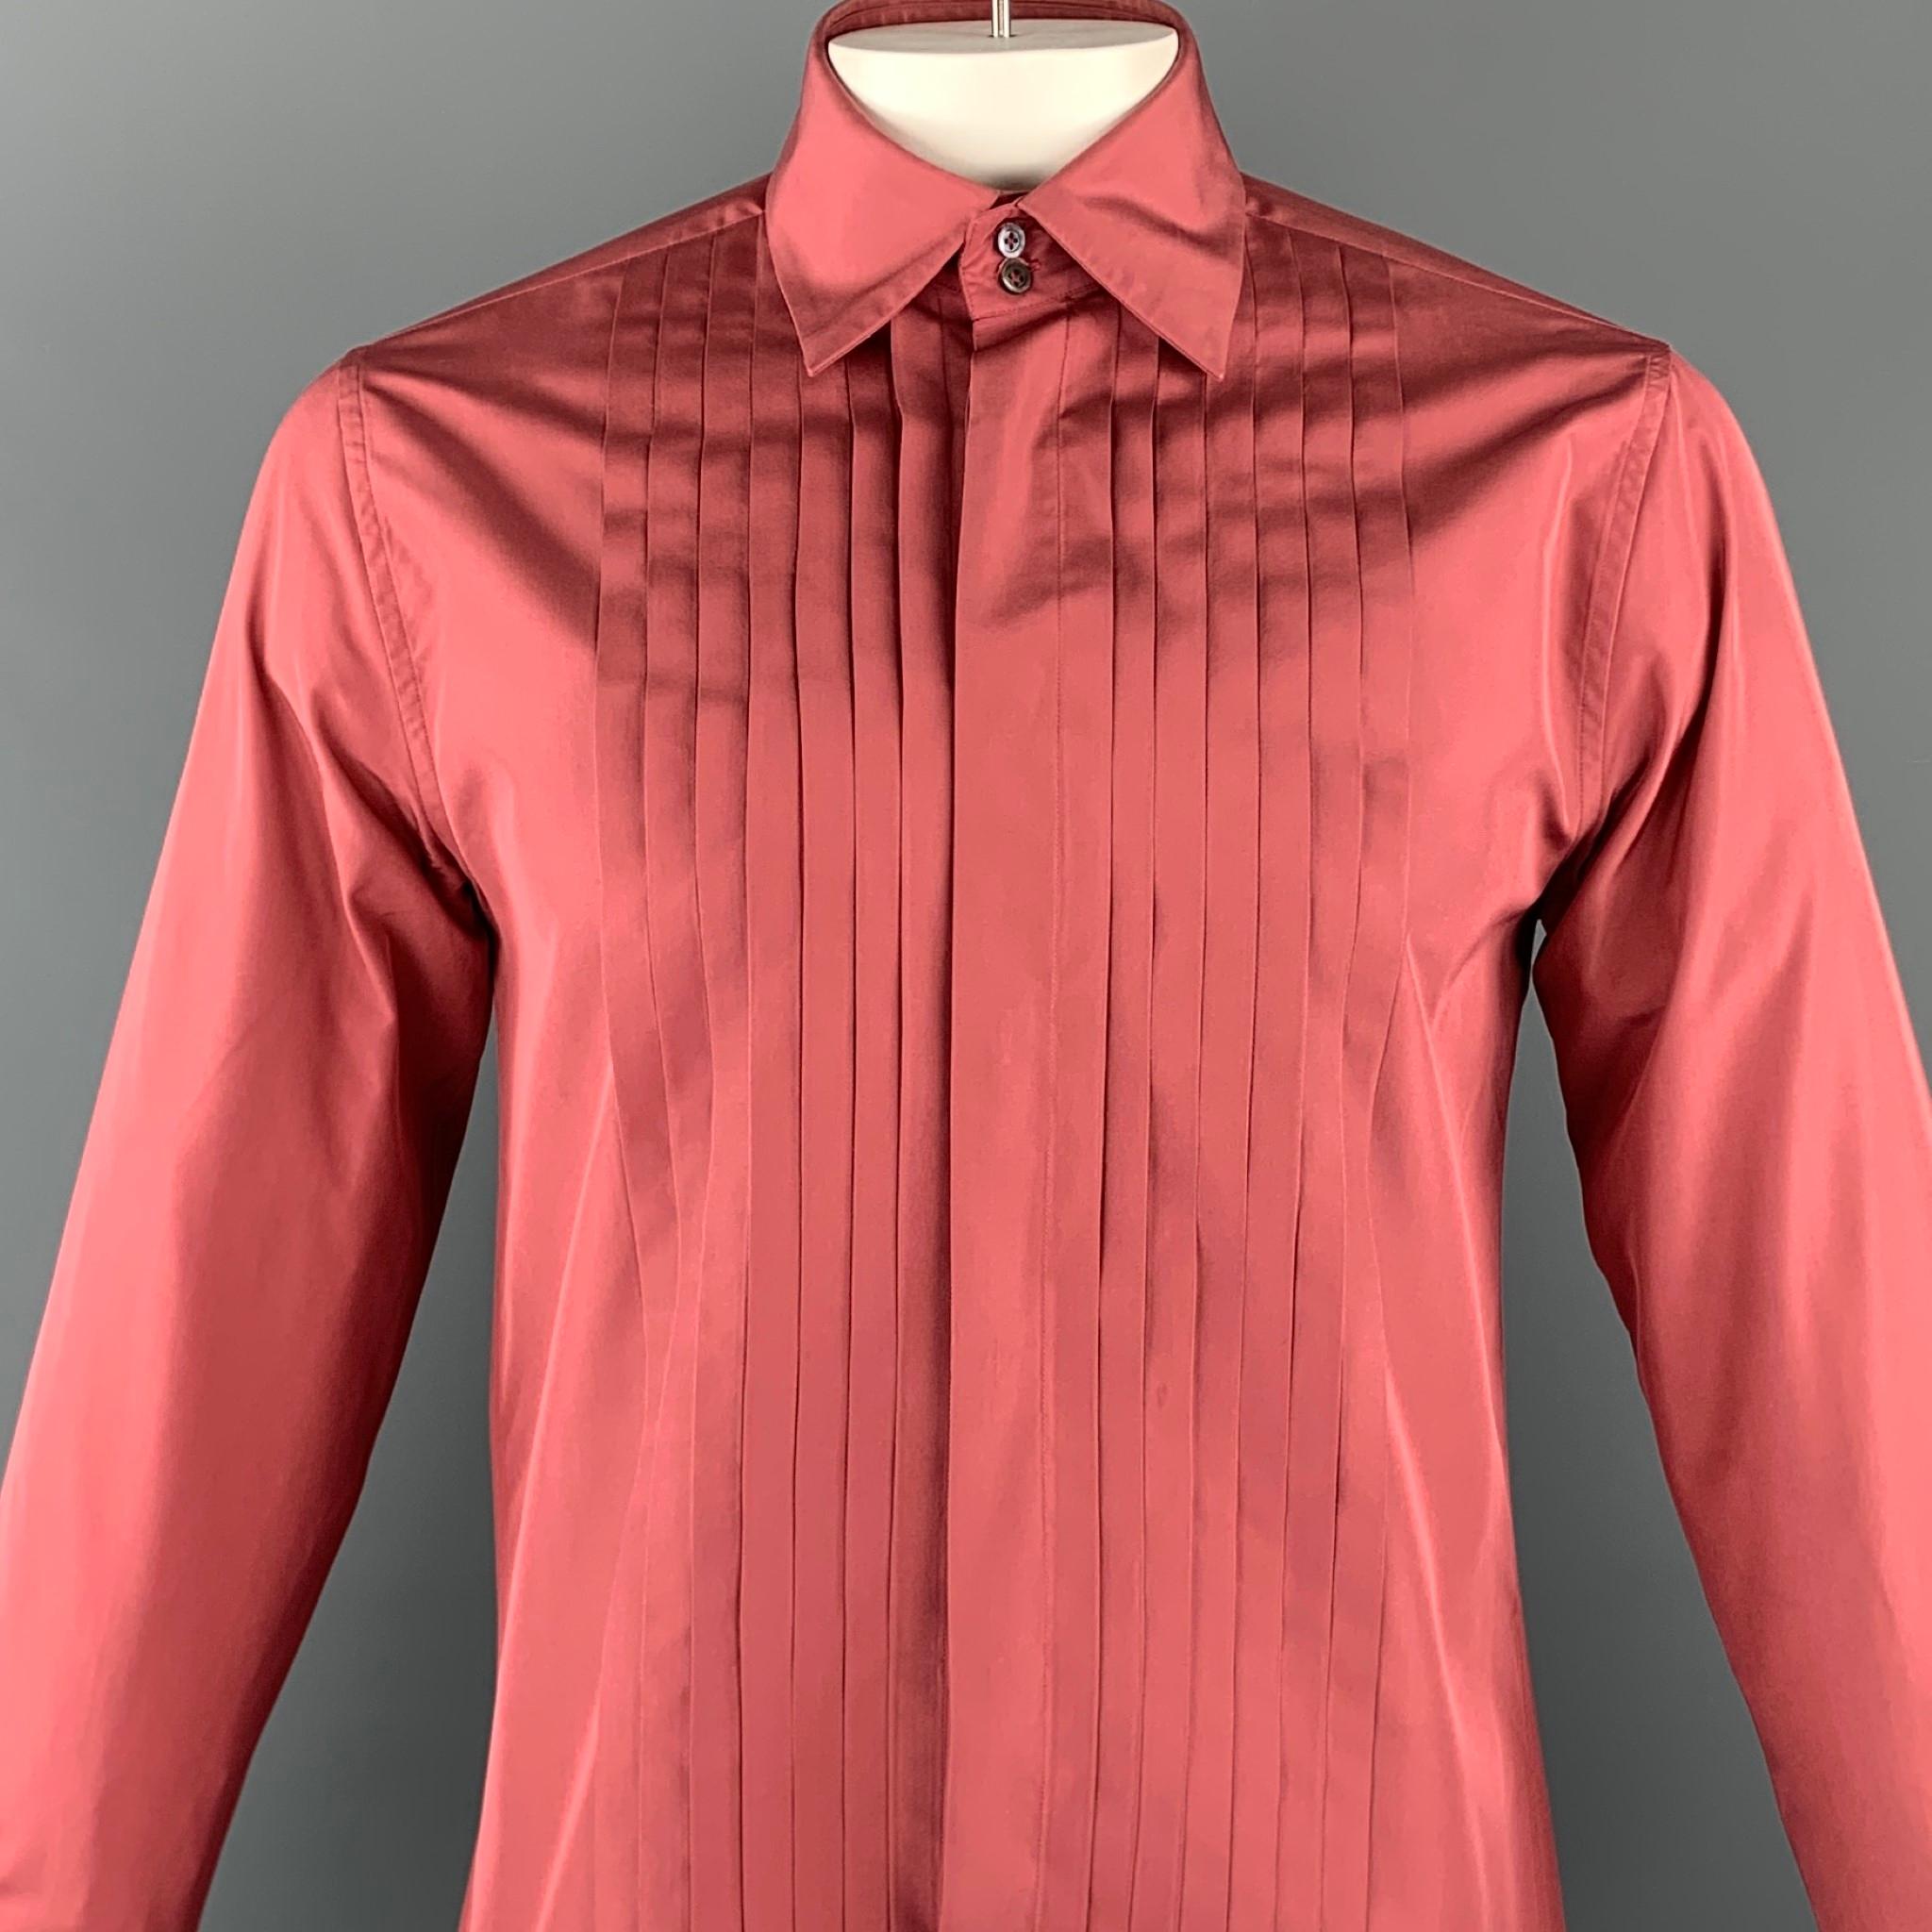 JIL SANDER long sleeve shirt comes in a blush pink silk featuring a button up style, pleated, french cuffs, and a hidden button closure. Made in Italy. Cufflinks not included.

Excellent Pre-Owned Condition.
Marked: 42

Measurements:

Shoulder: 17